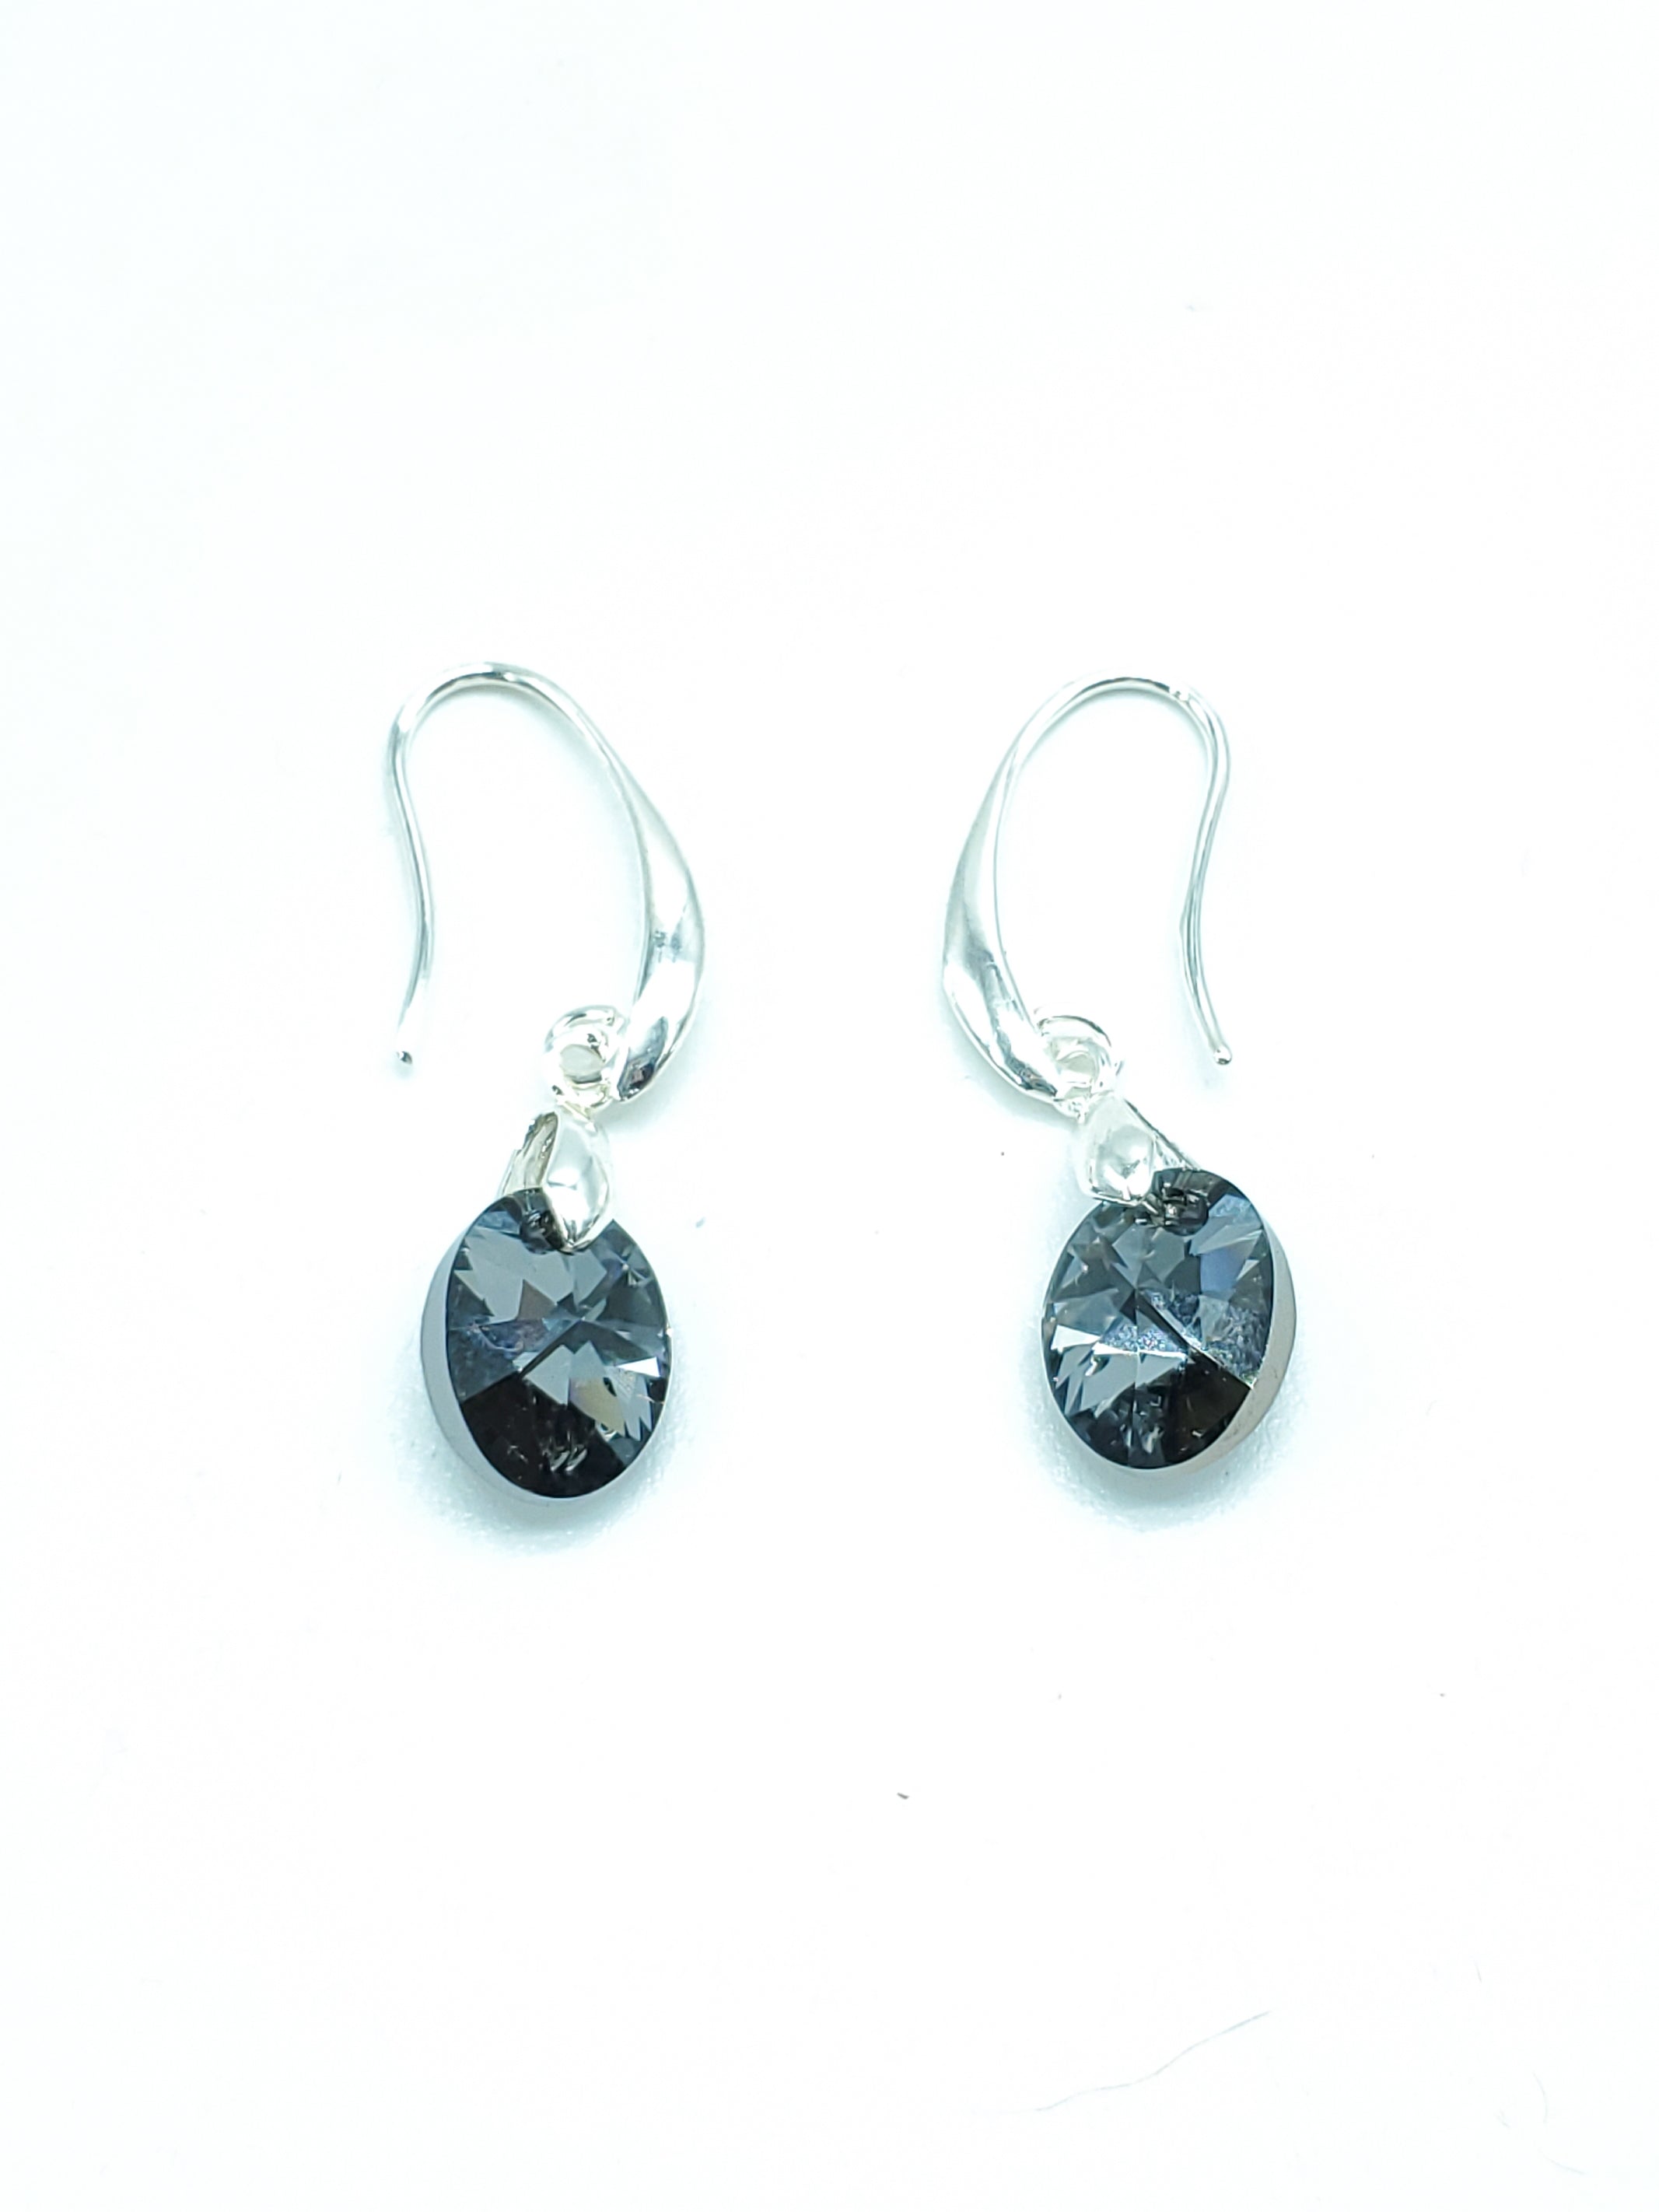 "Crystal Silver Night" Oval Swarovski Crystal/Sterling Silver Earrings - The Caffeinated Raven